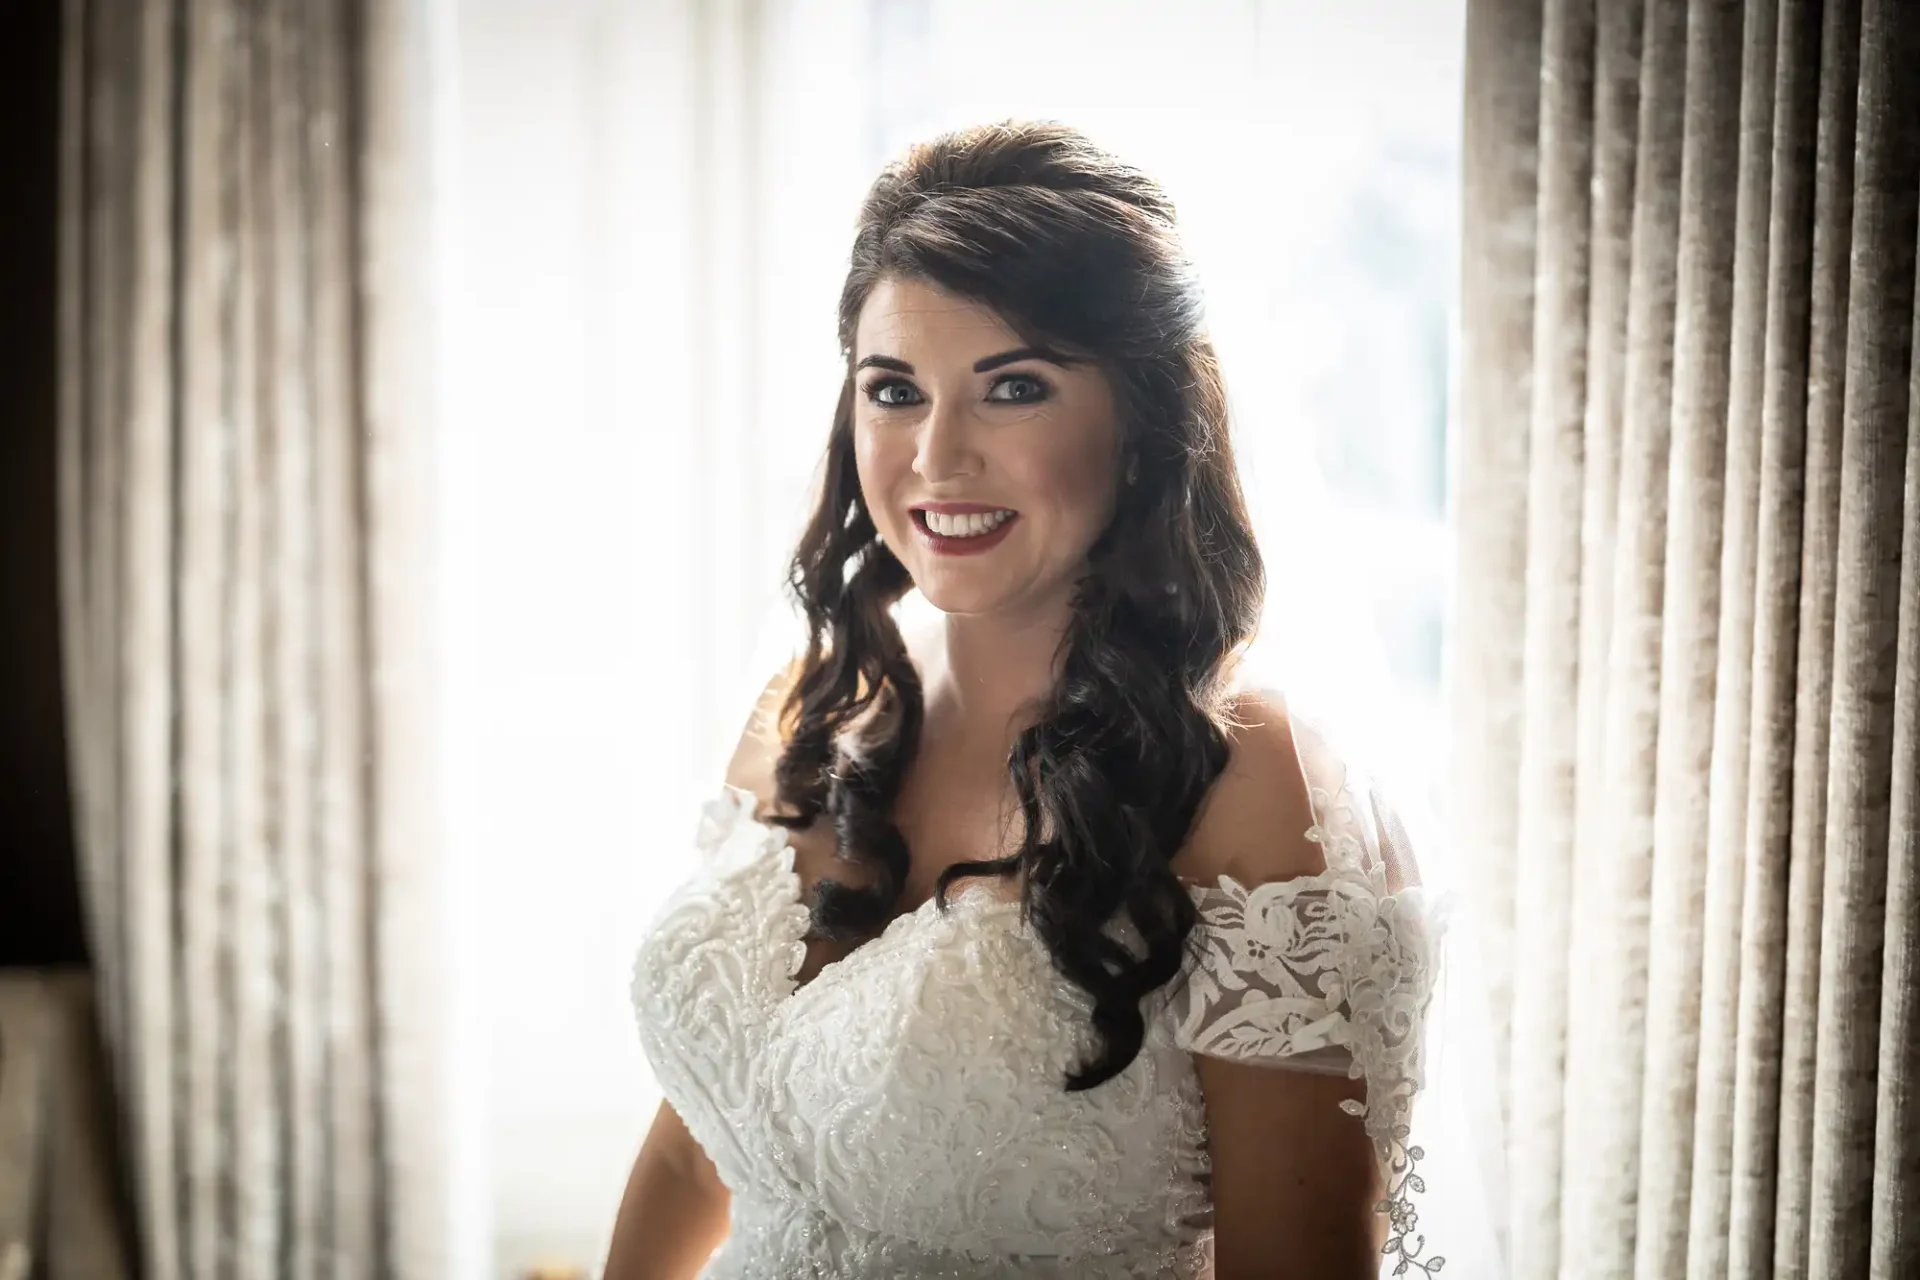 A bride in a white lace dress smiles warmly, standing near a window with sheer curtains diffusing light behind her.